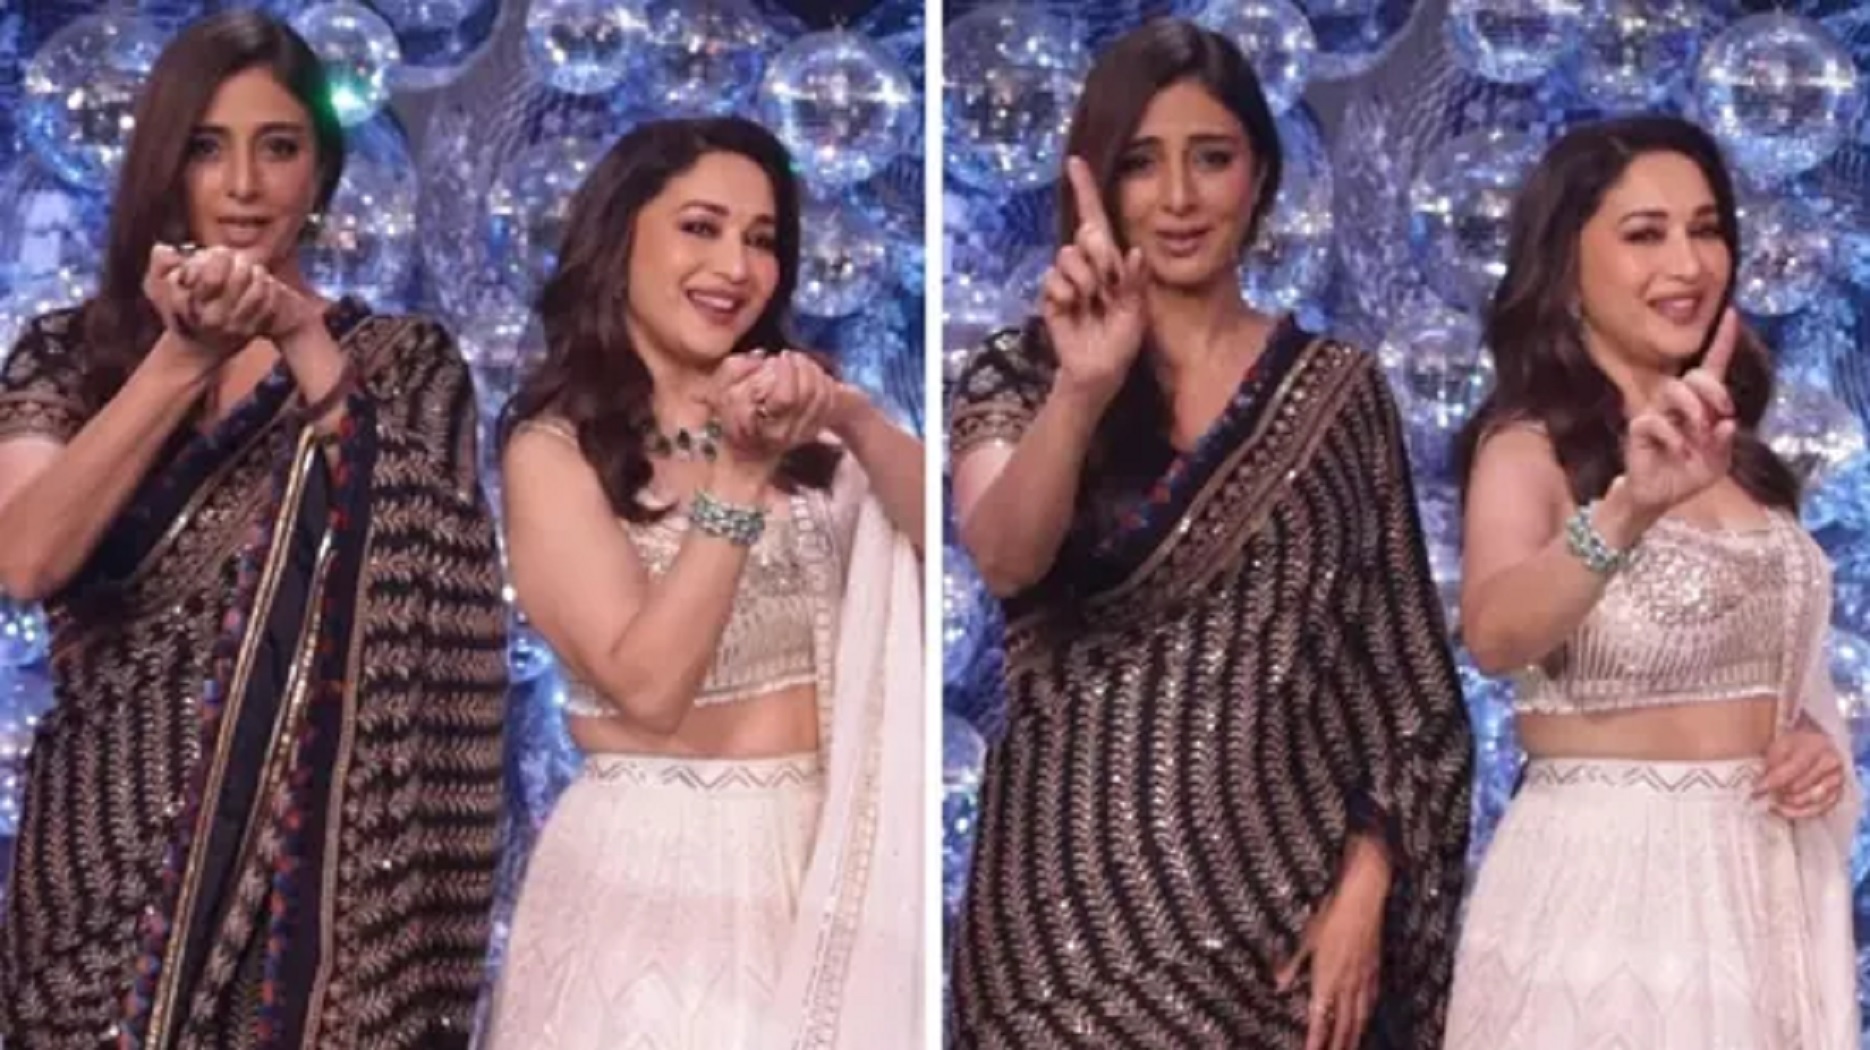 Bollywood Divas: Tabu And Madhuri Dixit Share The Stage Together On Jhalak Dikhhla Jaa 10 [Watch]